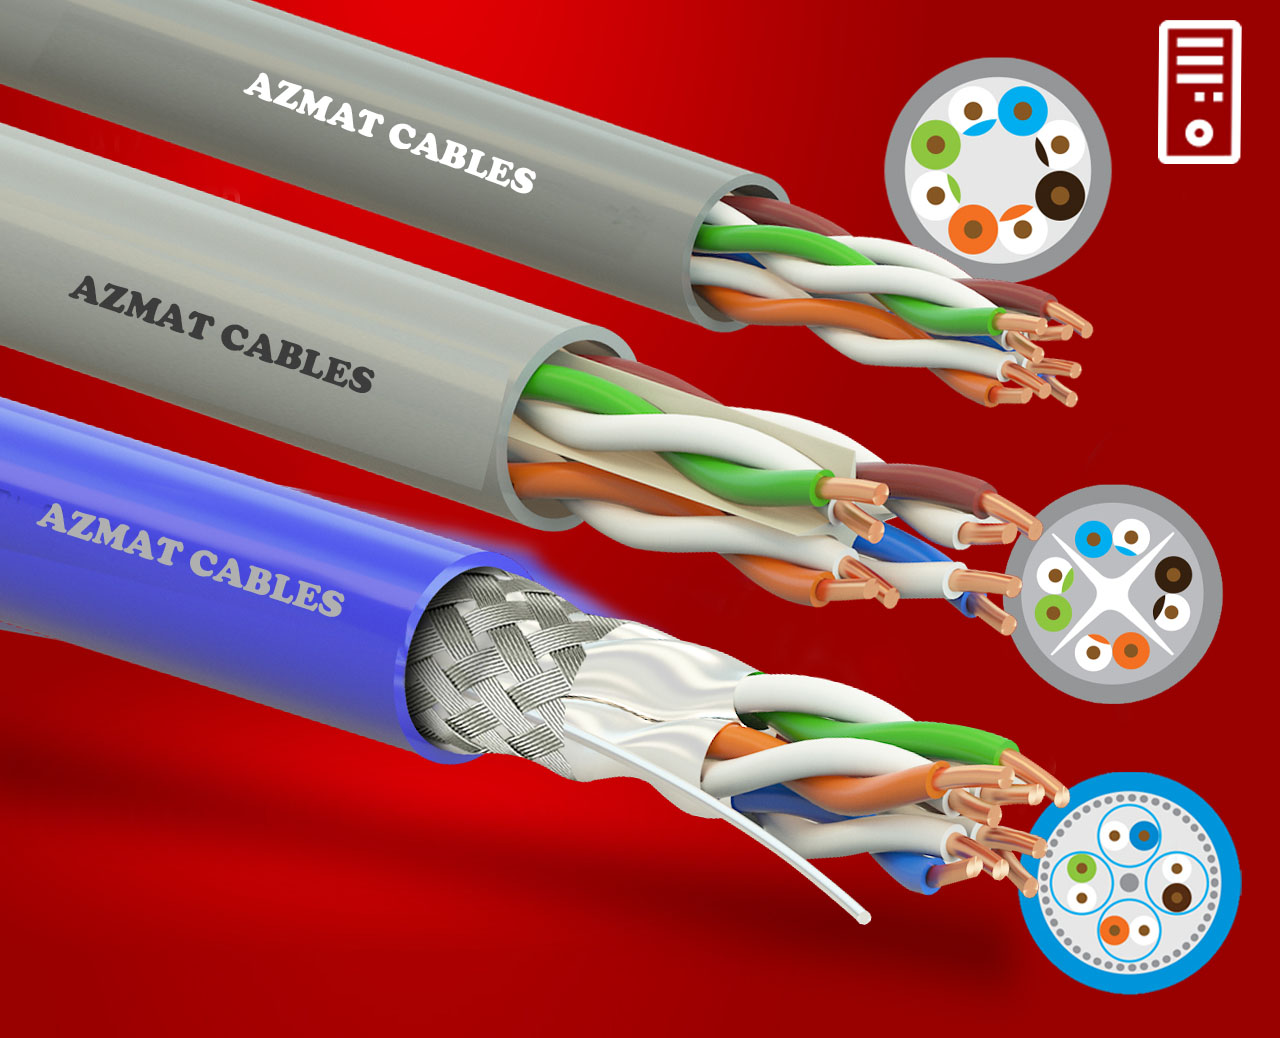 Networking Cables